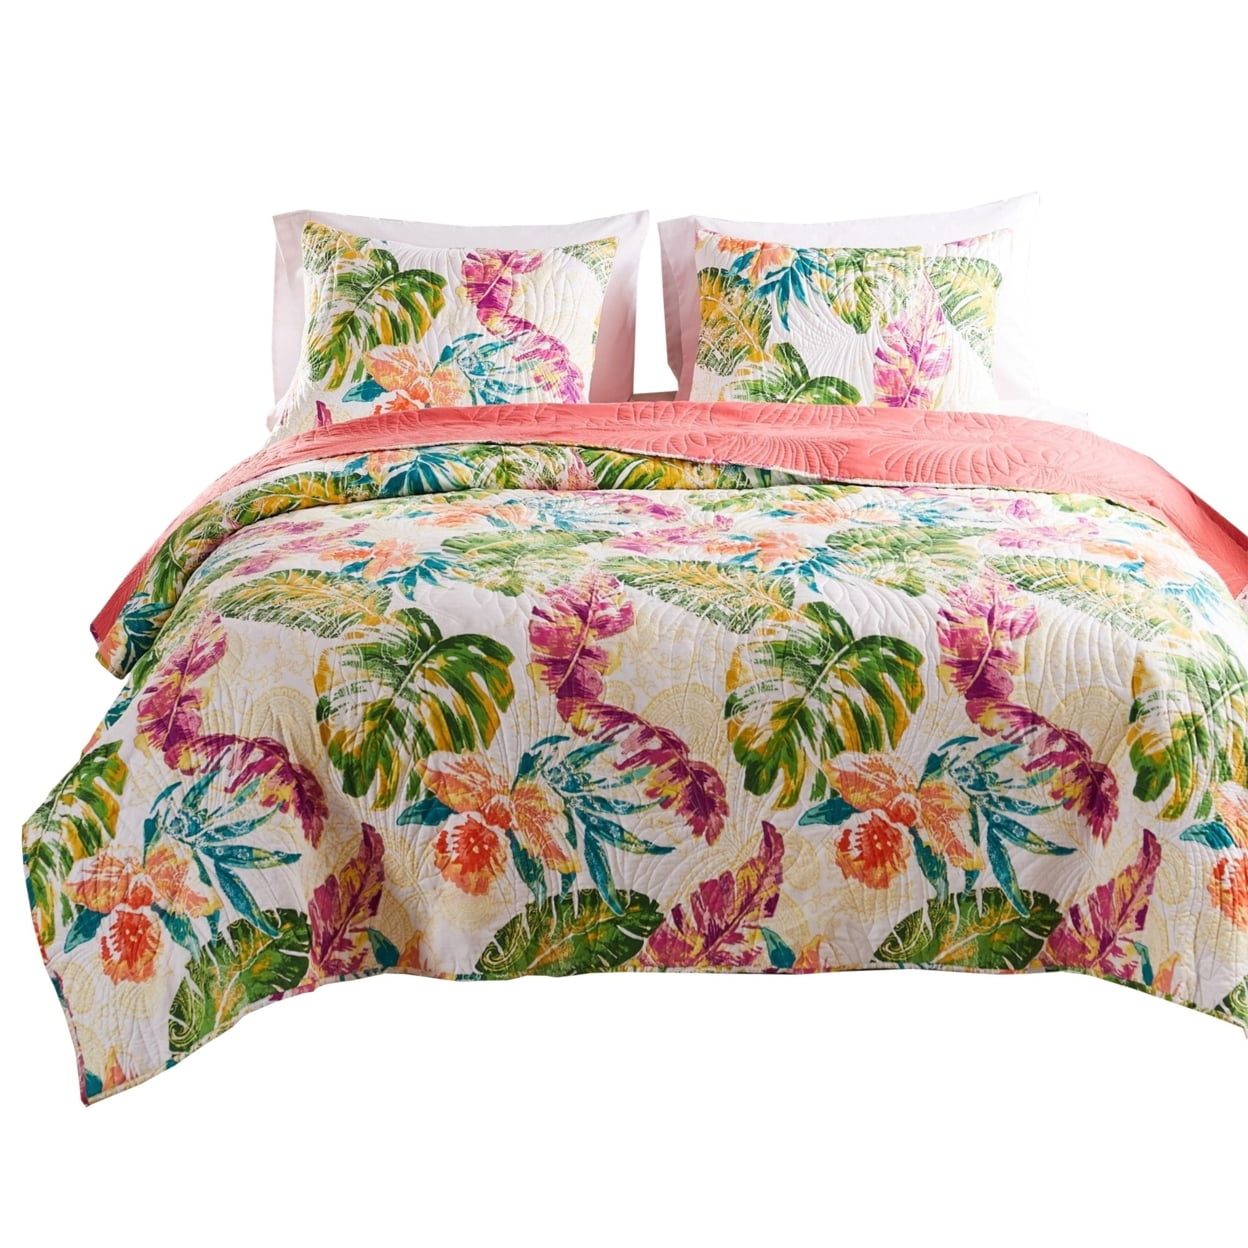 Picture of Benjara BM251009 3 Piece Aulne King Size Quilt Set with Leaf Print, Multicolor